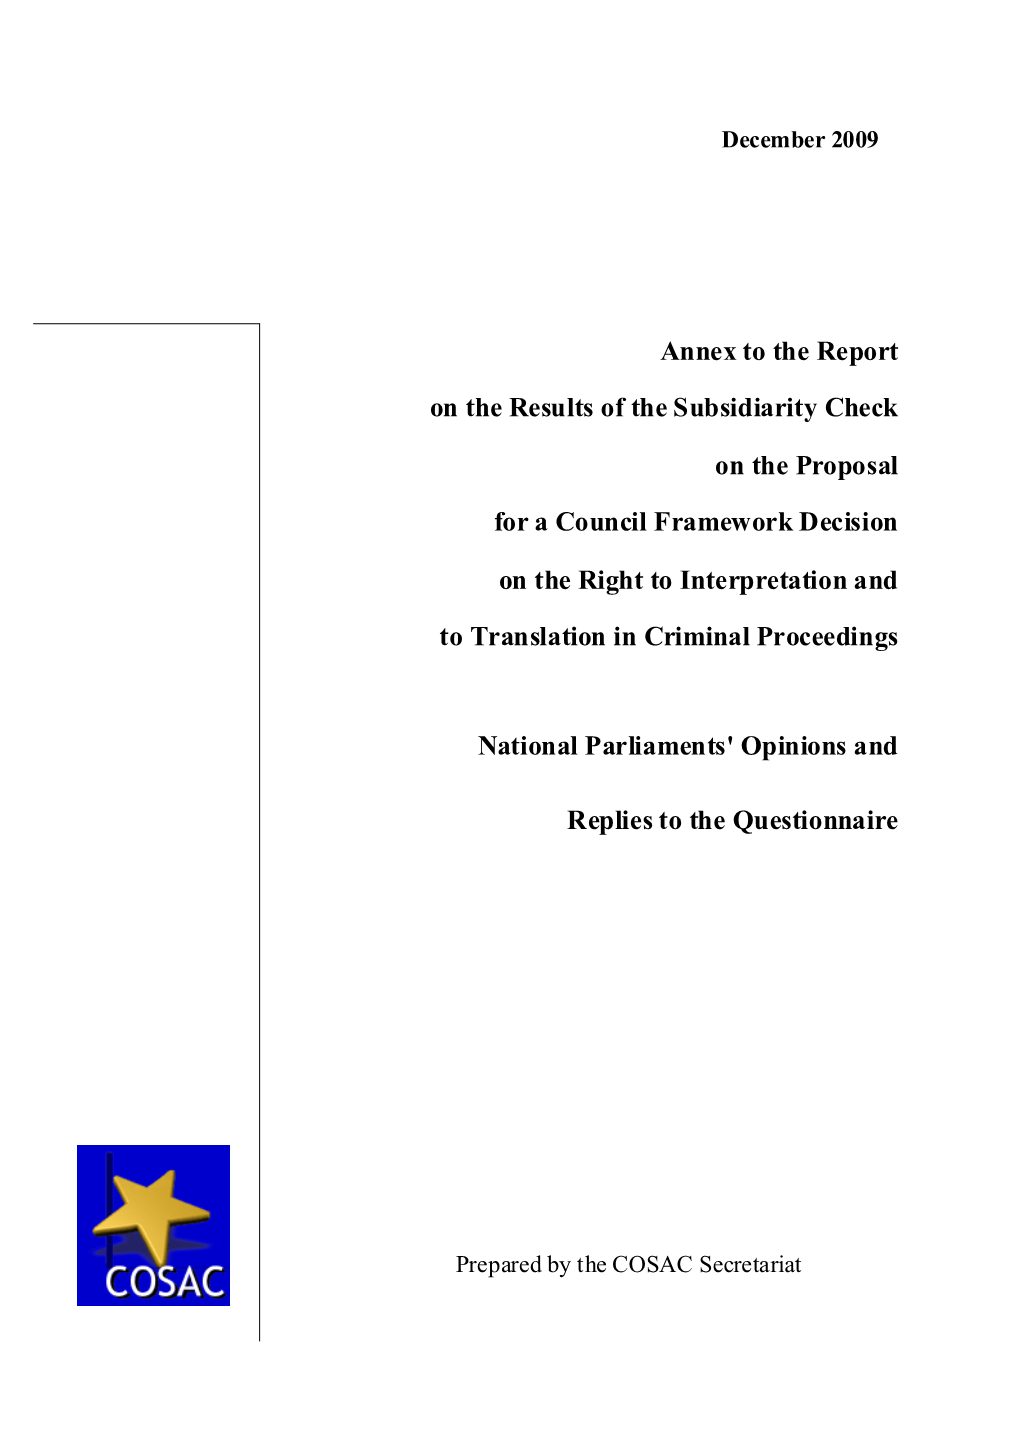 Annex to the Report on the Results of the Subsidiarity Check On